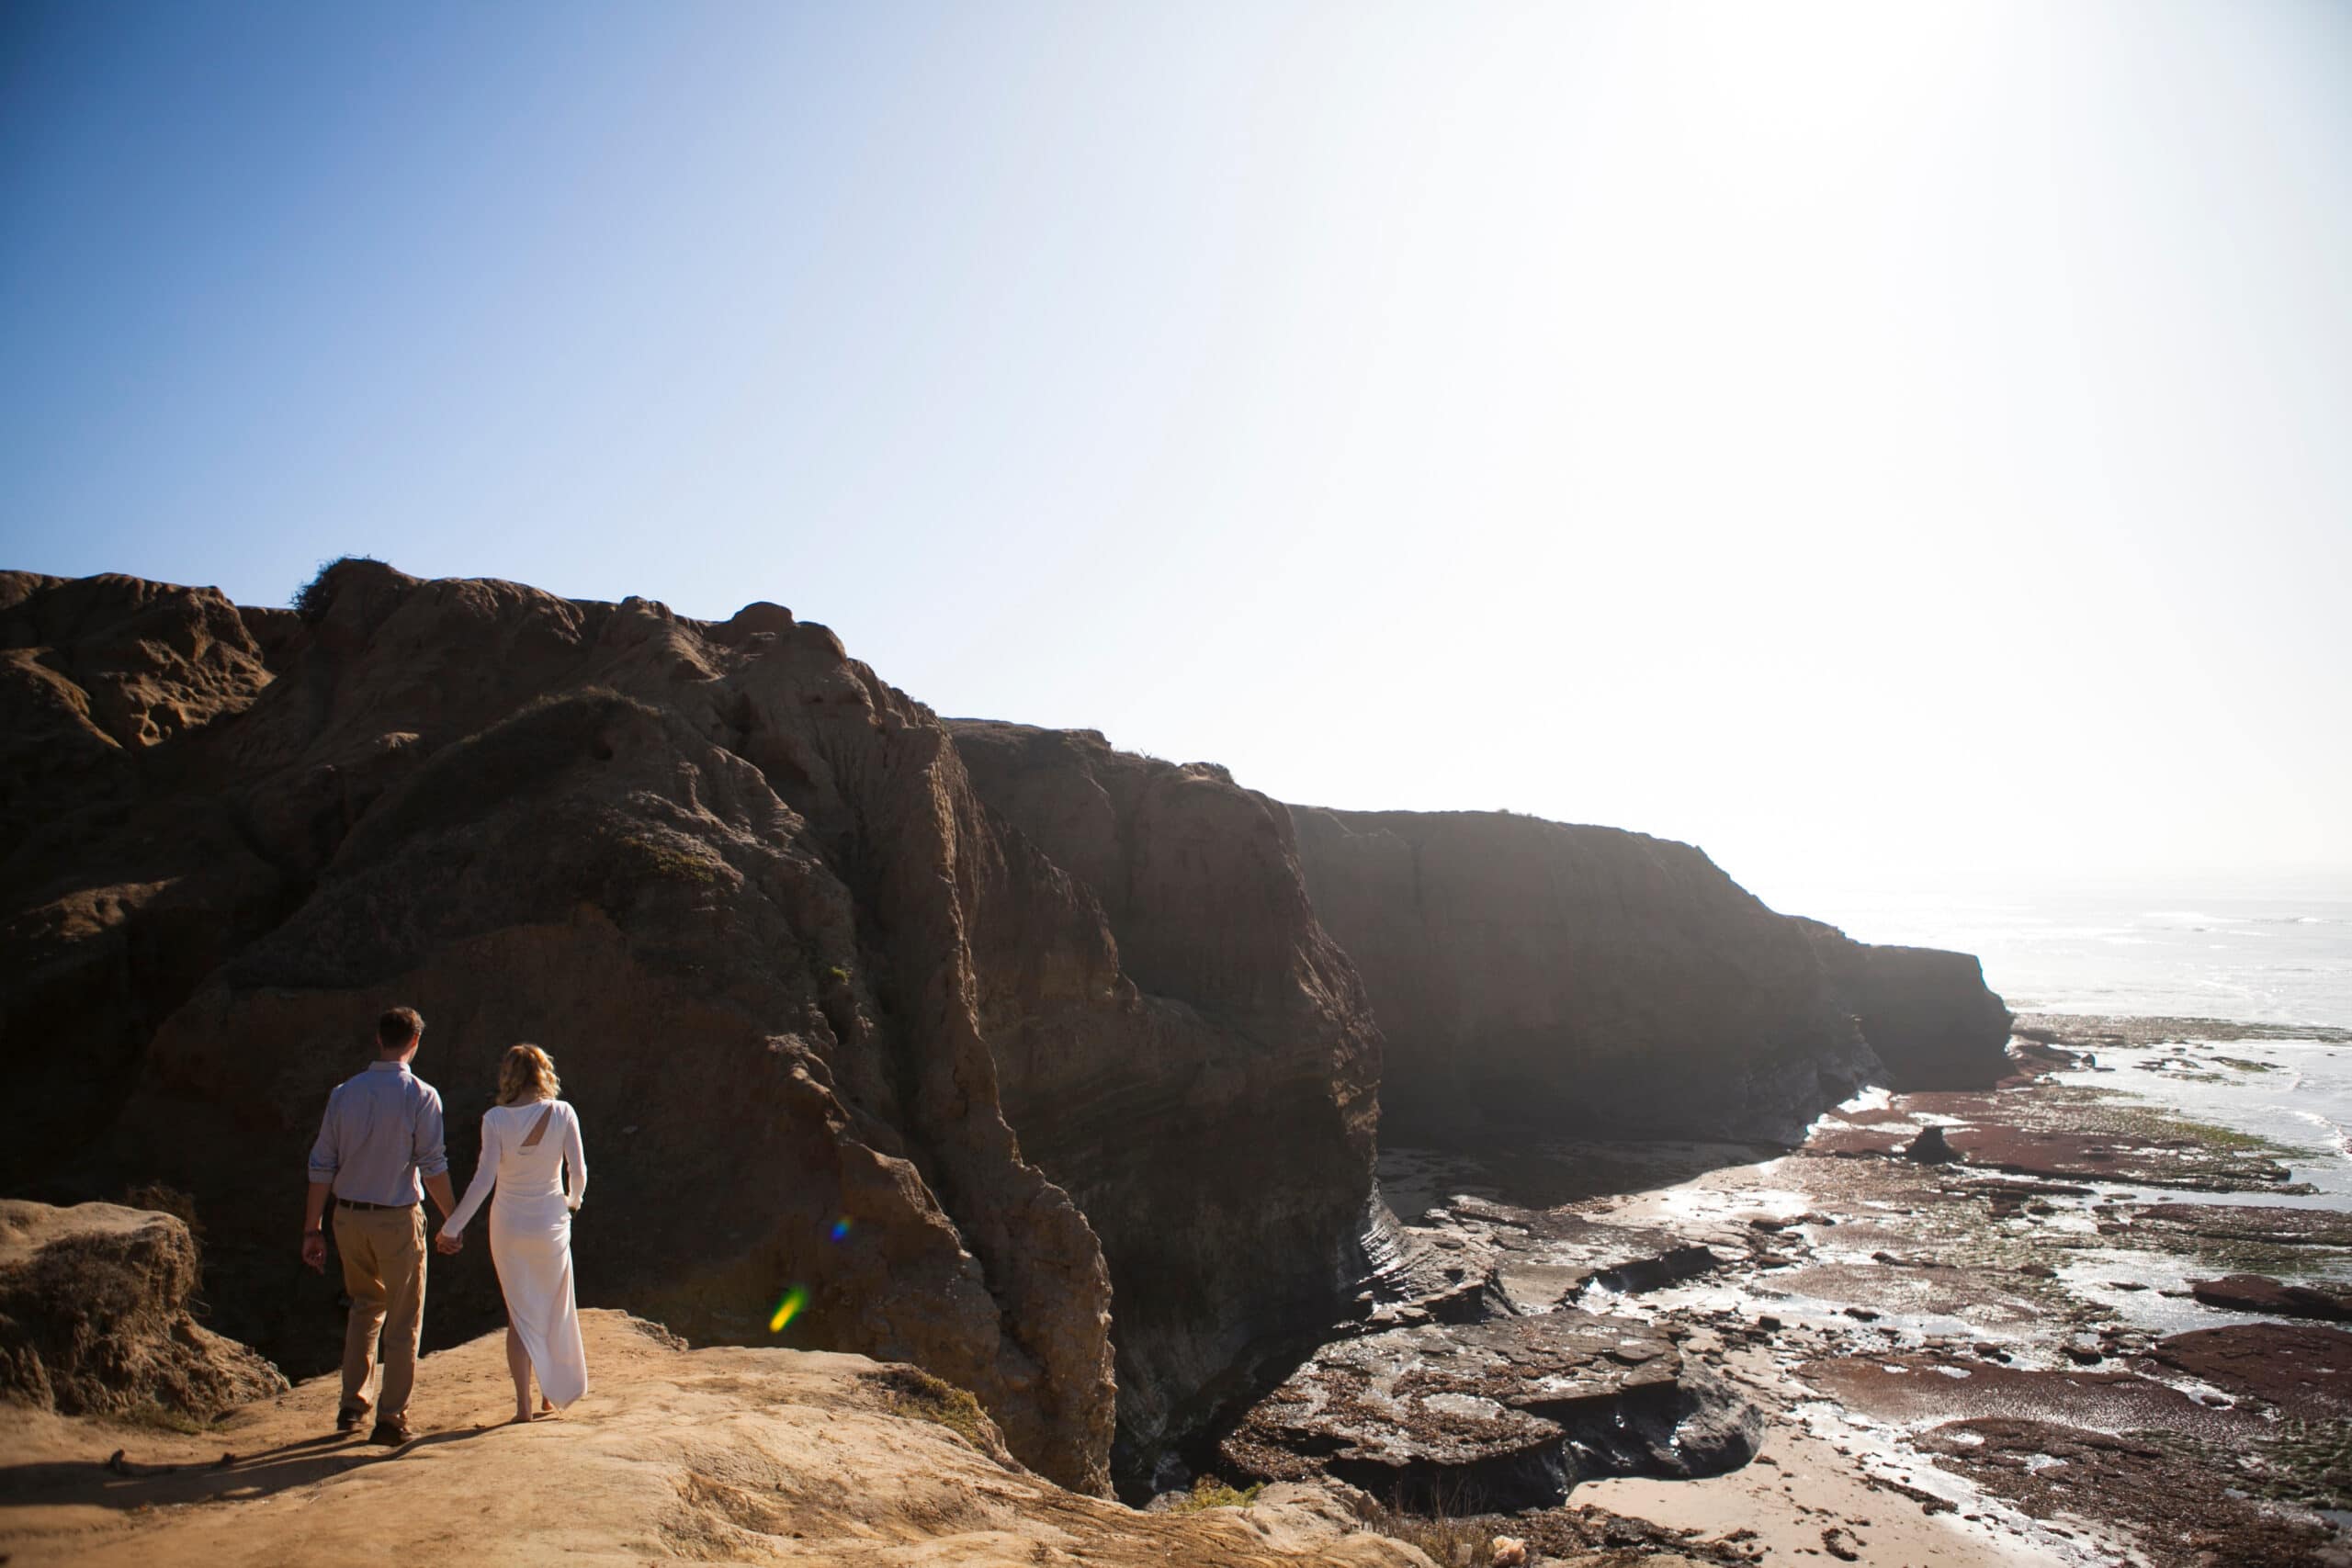 sunset cliffs elopement wedding and portrait of a couple walking along the cliff at late afternoon. photographer is positioned higher-up on the cliff to get a broad view of the ocean.